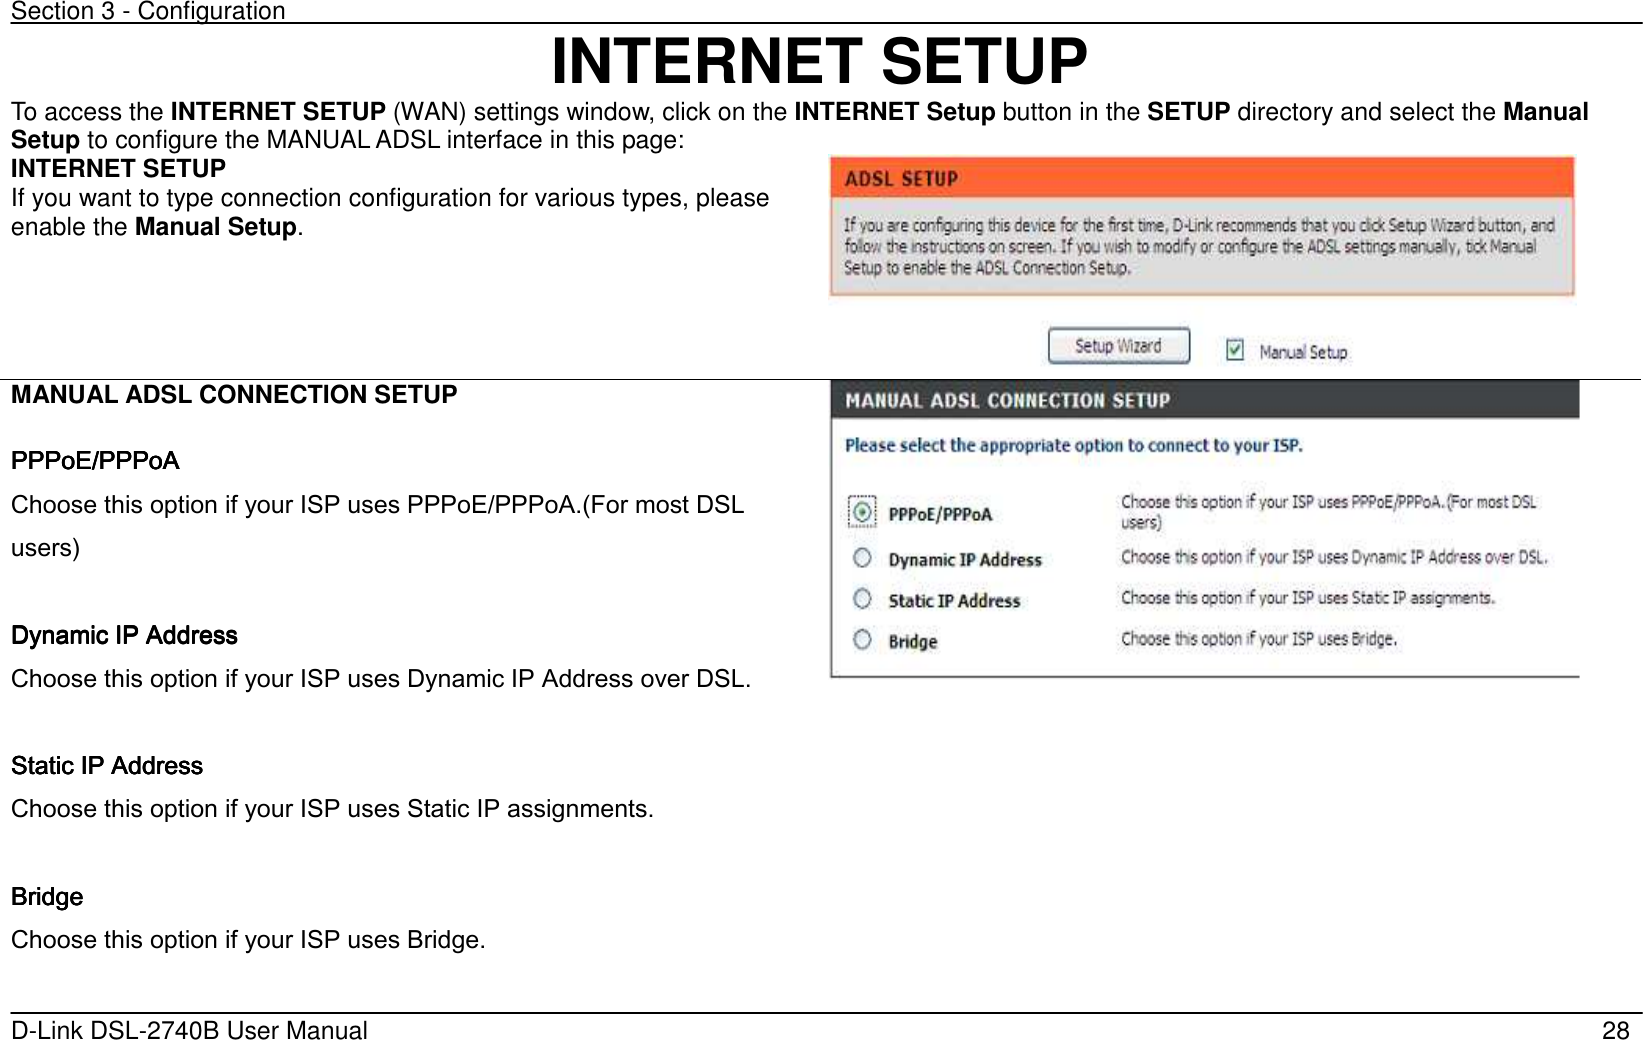 Section 3 - Configuration   D-Link DSL-2740B User Manual                                                  28 INTERNET SETUP To access the INTERNET SETUP (WAN) settings window, click on the INTERNET Setup button in the SETUP directory and select the Manual Setup to configure the MANUAL ADSL interface in this page: INTERNET SETUP If you want to type connection configuration for various types, please enable the Manual Setup.       MANUAL ADSL CONNECTION SETUP  PPPoE/PPPoA PPPoE/PPPoA PPPoE/PPPoA PPPoE/PPPoA      Choose this option if your ISP uses PPPoE/PPPoA.(For most DSL users’     DynaDynaDynaDynamic IP Addressmic IP Addressmic IP Addressmic IP Address    Choose this option if your ISP uses Dynamic IP Address over DSL.     Static IP AddressStatic IP AddressStatic IP AddressStatic IP Address    Choose this option if your ISP uses Static IP assignments.  BridgeBridgeBridgeBridge    Choose this option if your ISP uses Bridge.   